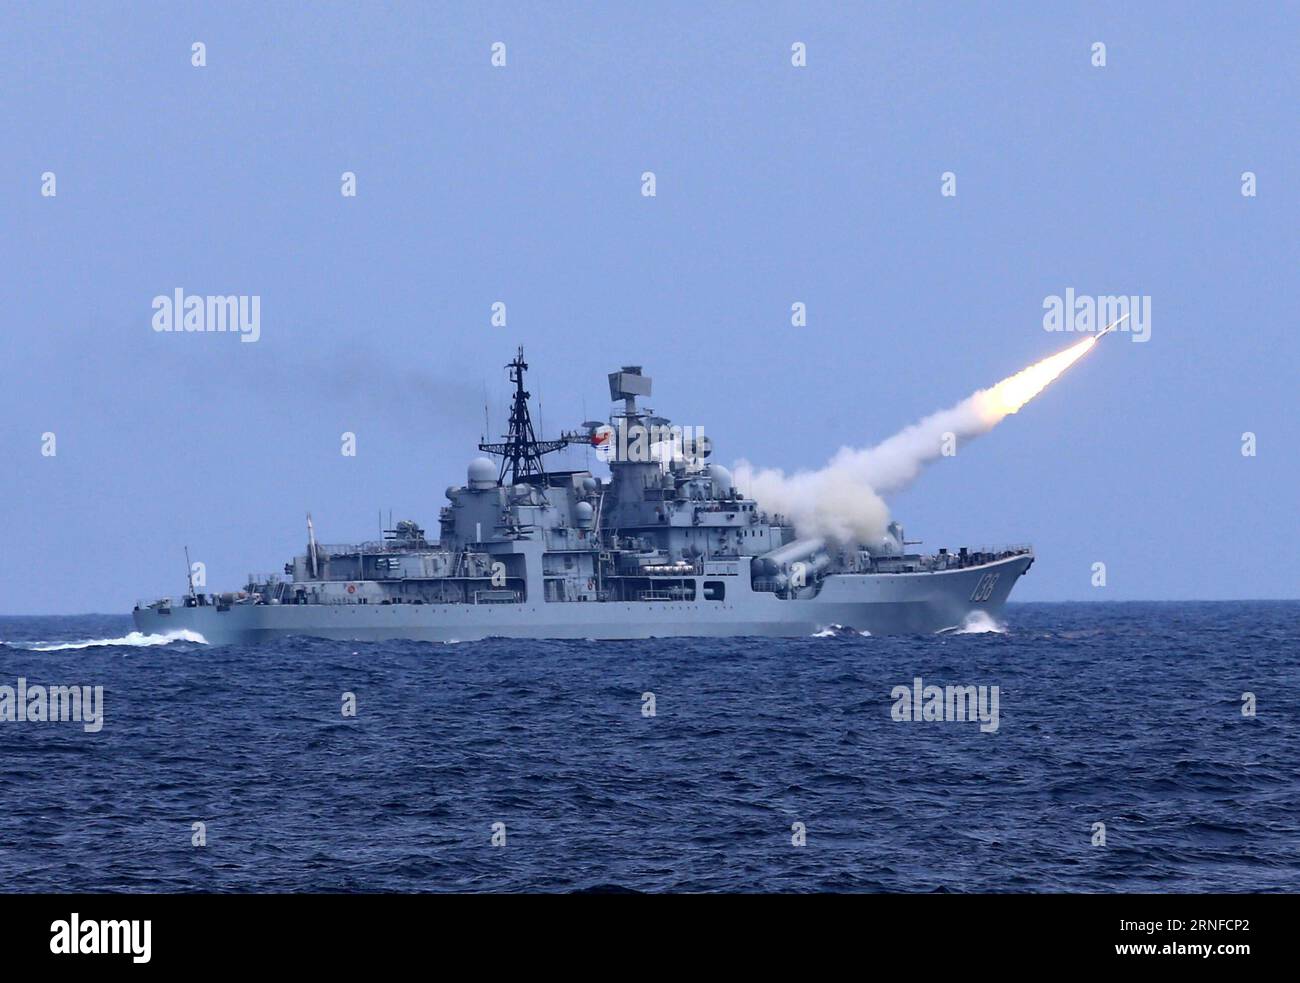 Bilder des Tages China - Marine-Übung im ostchinesischen Meer (160801) -- NINGBO, Aug. 1, 2016 -- An anti-aircraft missile is launched during a drill in the East China Sea, Aug 1, 2016. The Chinese navy started a drill, which involved firing dozens of missiles and torpedoes, in the East China Sea Monday. The drill involved naval aviation forces, including submarines, ships and coastguard troops. ) (wyl) CHINA-ZHEJIANG-EAST CHINA SEA-NAVY-DRILL (CN) DaixZongfeng PUBLICATIONxNOTxINxCHN   Images the Day China Navy Exercise in Ostchinesischen Sea 160801 Ningbo Aug 1 2016 to Anti Aircraft Missile I Stock Photo